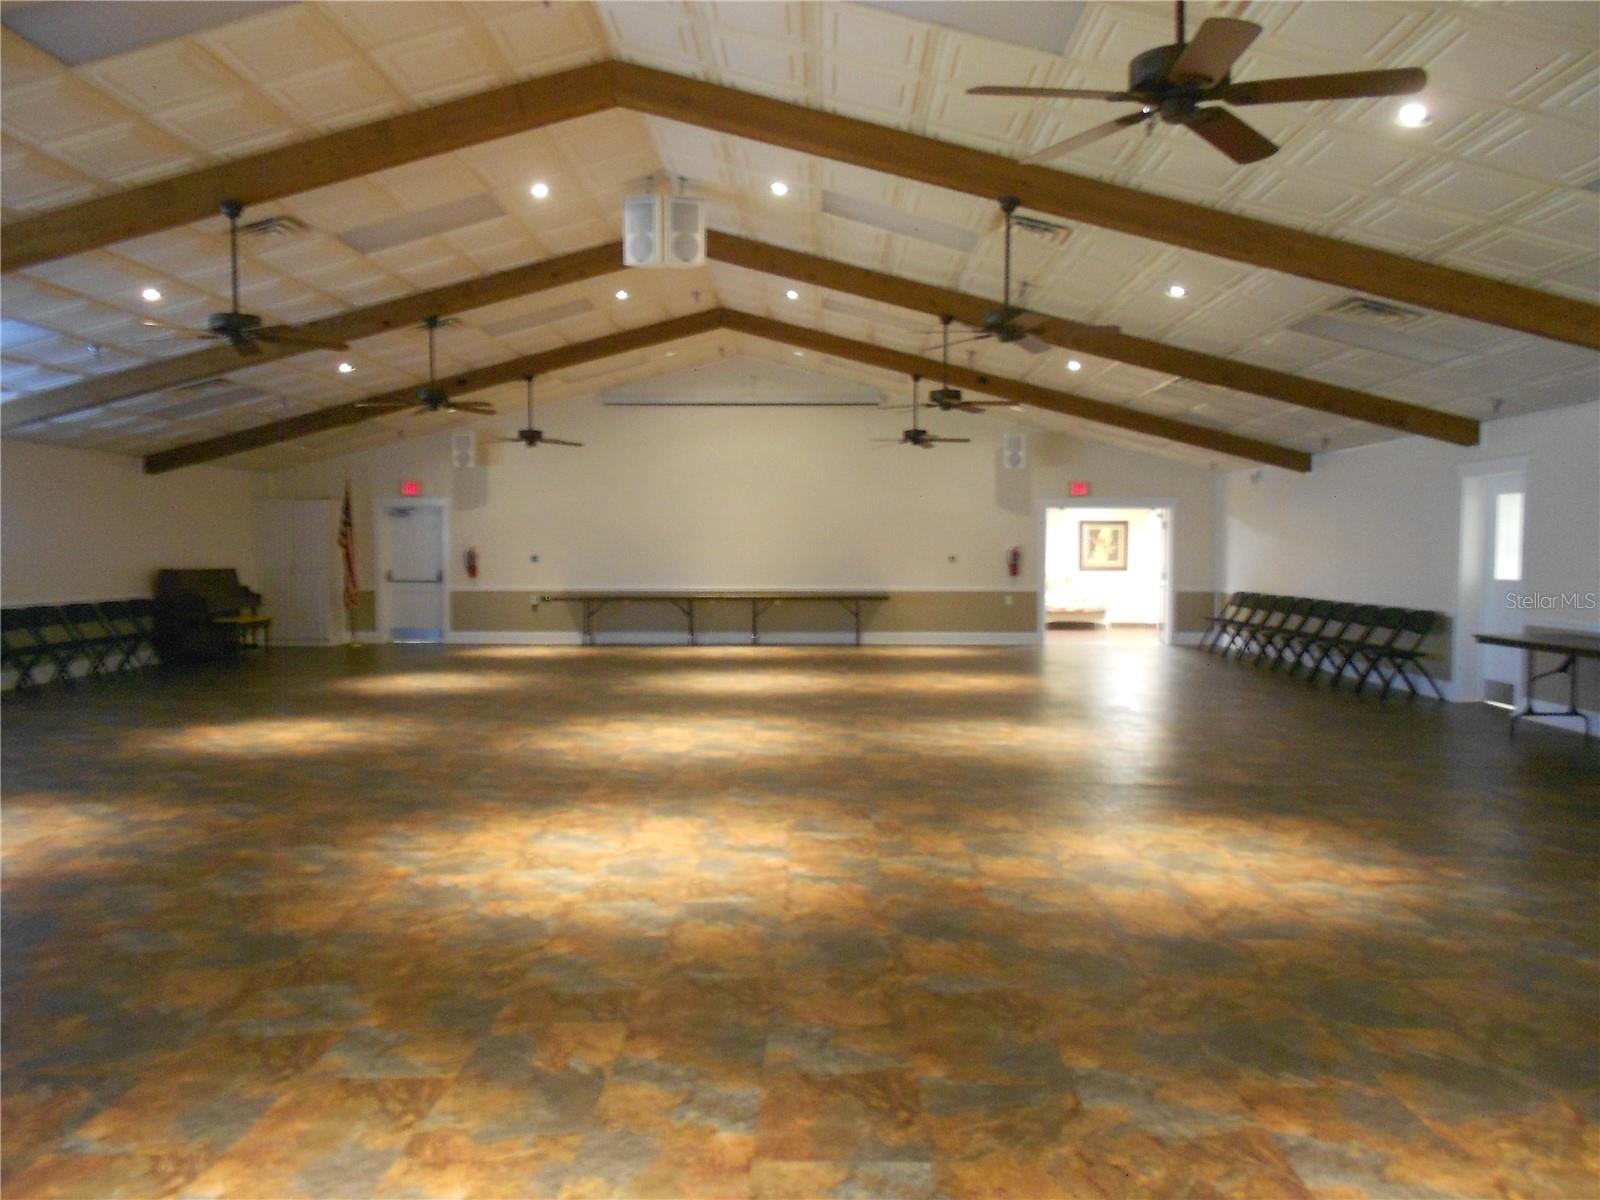 The Great Room for Line dancing